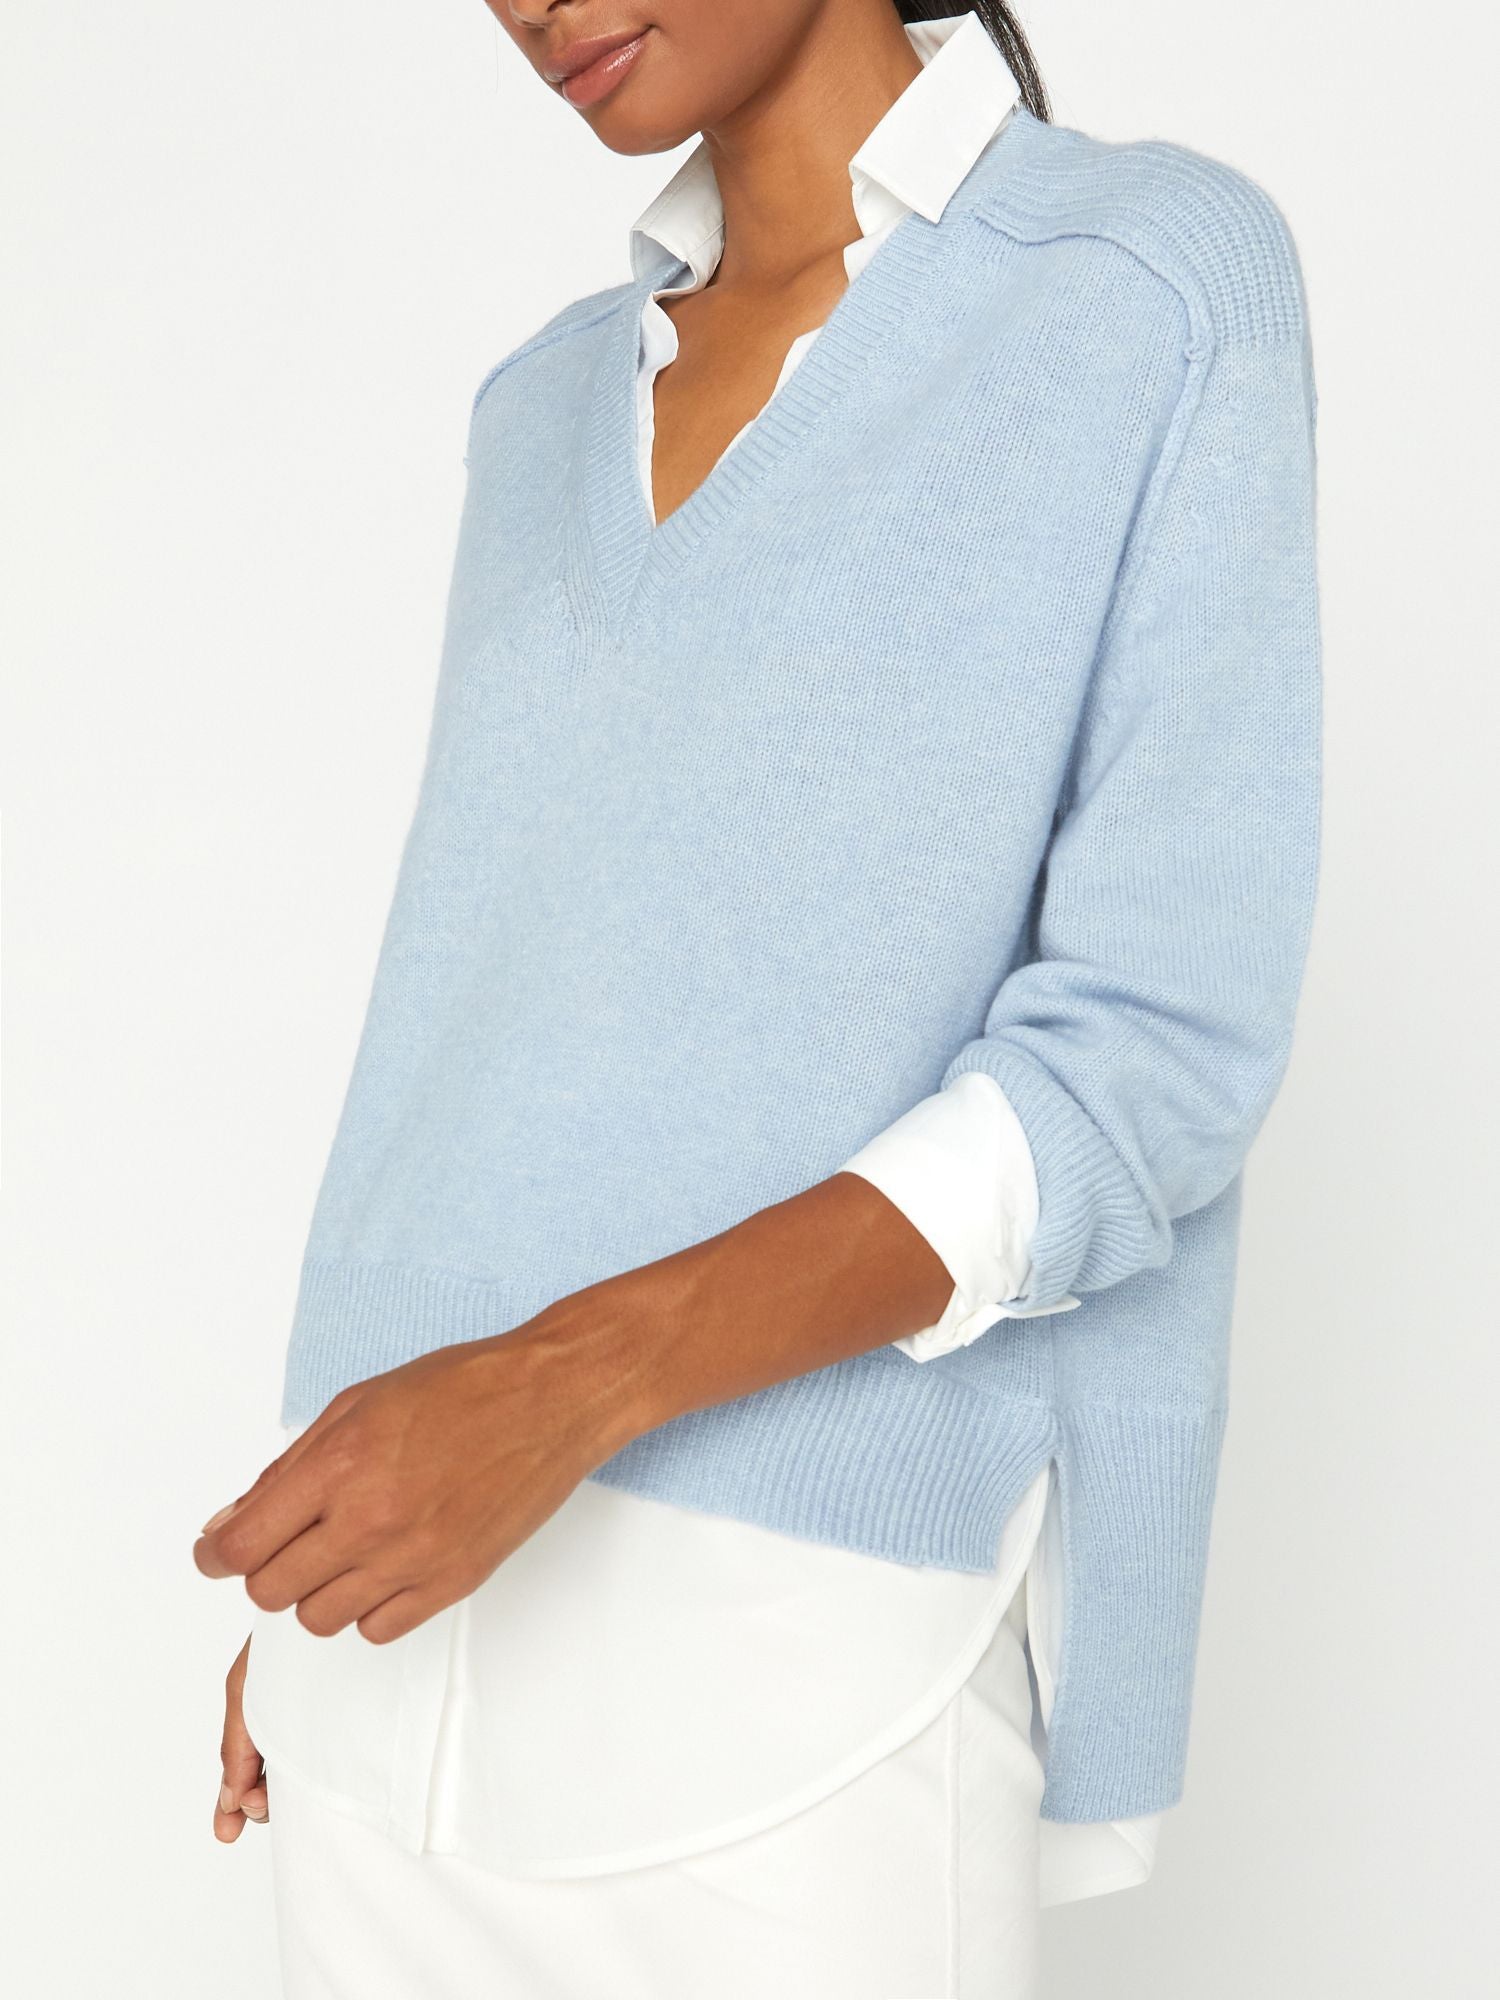 The Looker Layered V-Neck